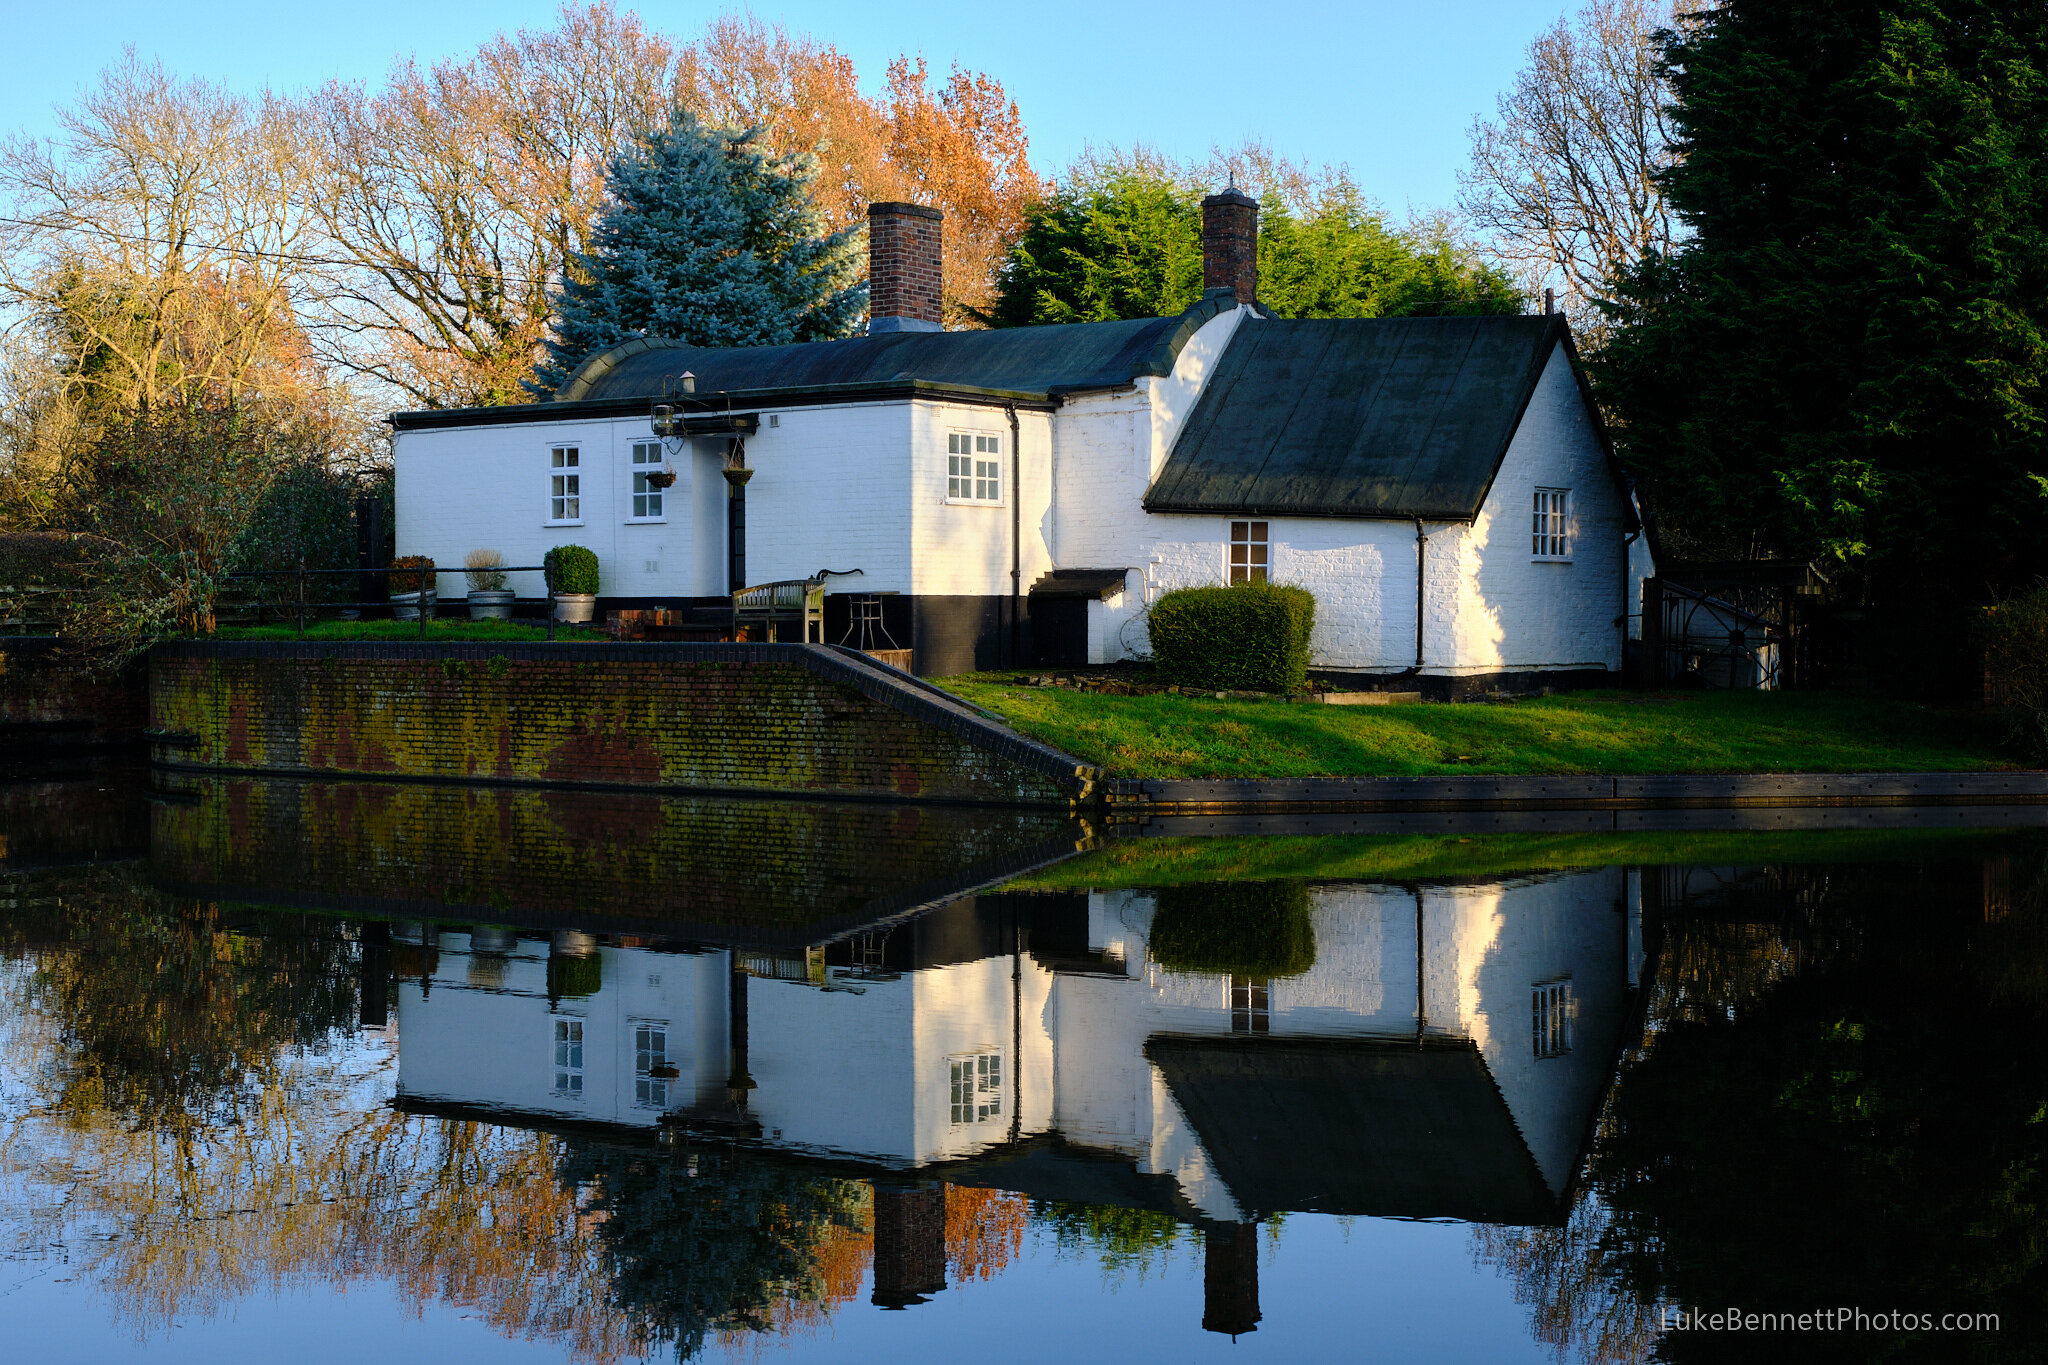  www.lukebennettphotos.com  A pretty house reflecting on a large turning section of the Grand Union waterway.  